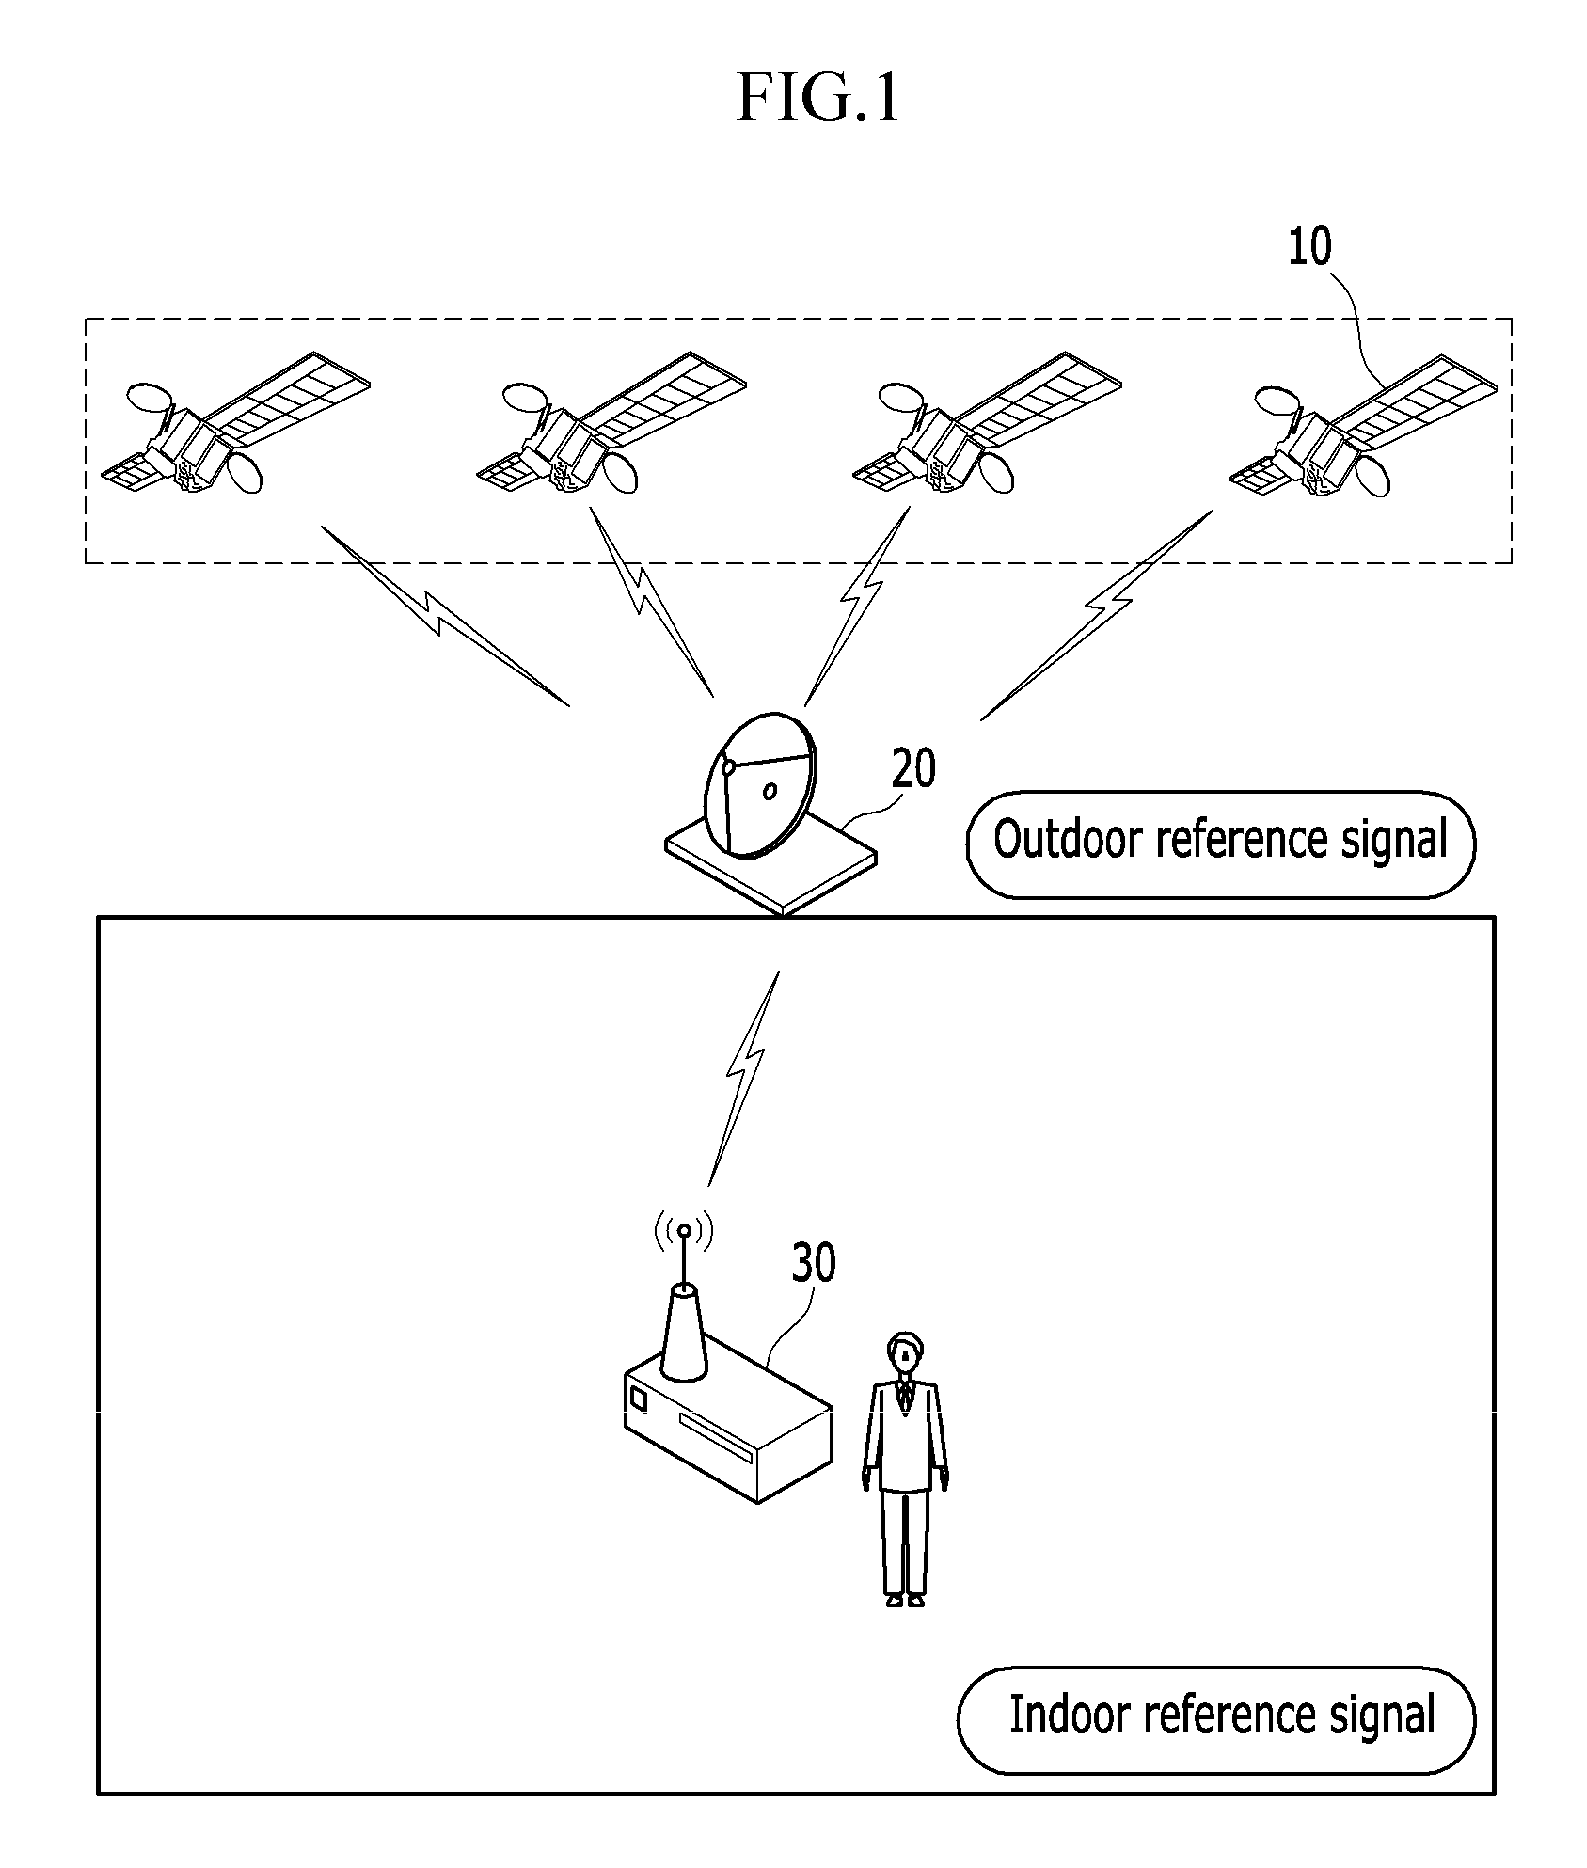 System and method for indoor location tracking using pseudo GPS signal transmitter